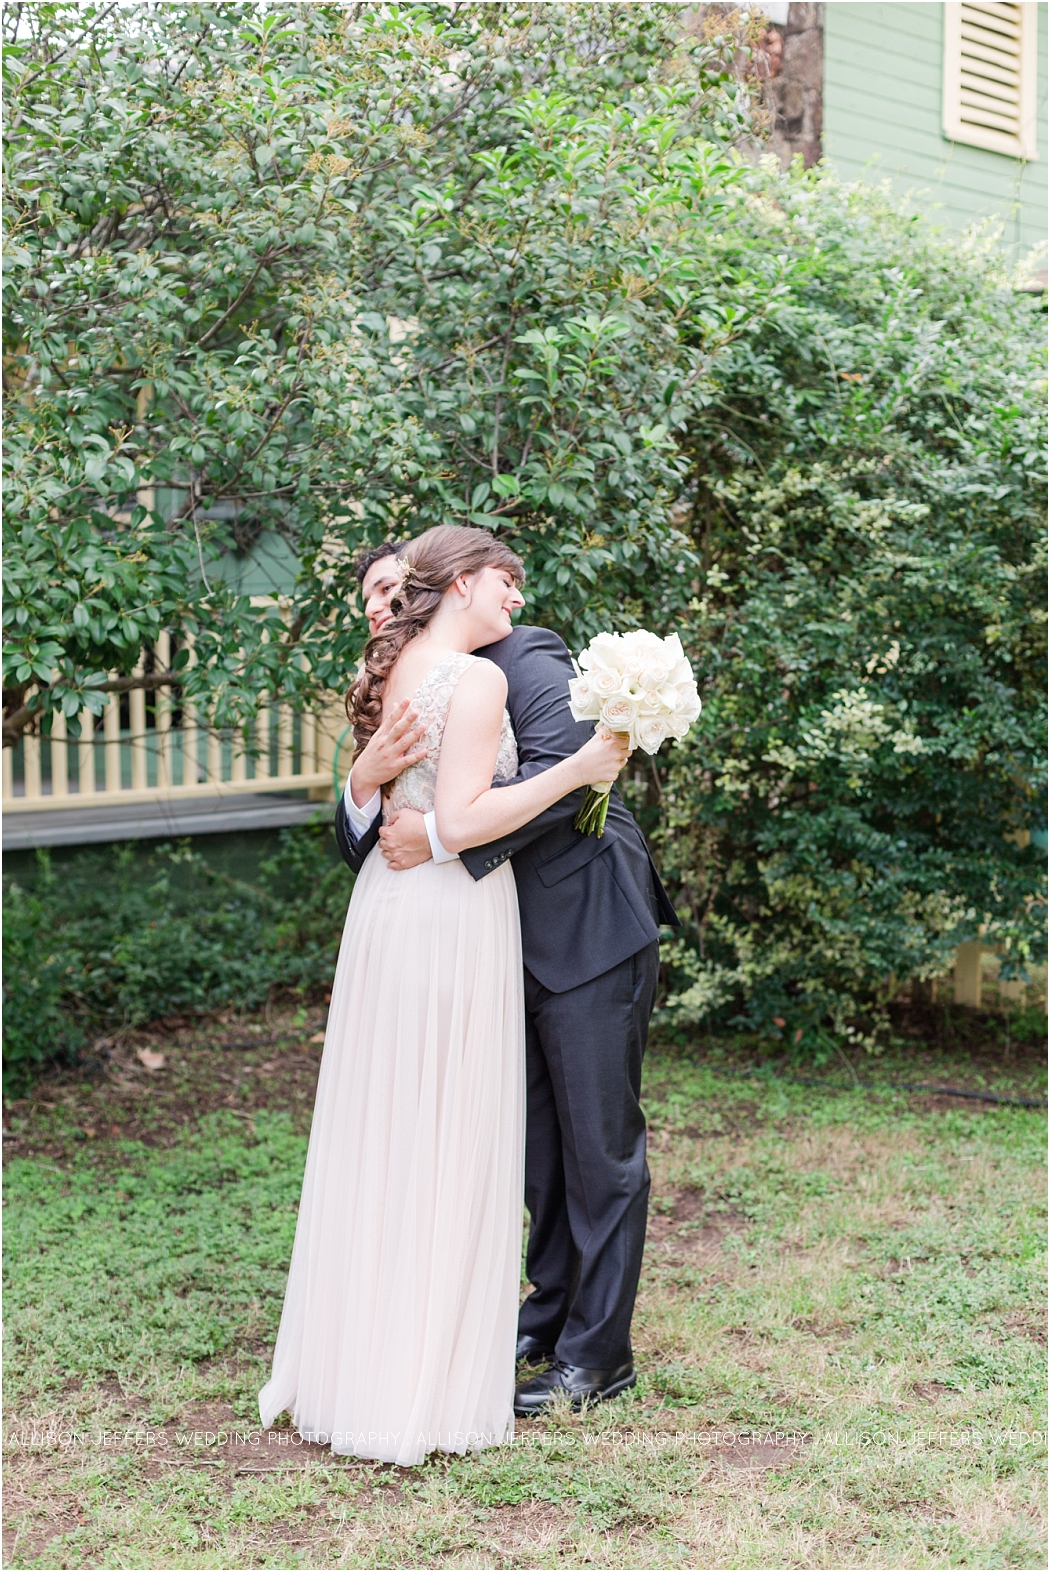 a-teal-and-blush-wedding-at-lakeside-pavillion-in-marble-falls-texas-by-allison-jeffers-wedding-photography-austin-wedding-photographer_0024